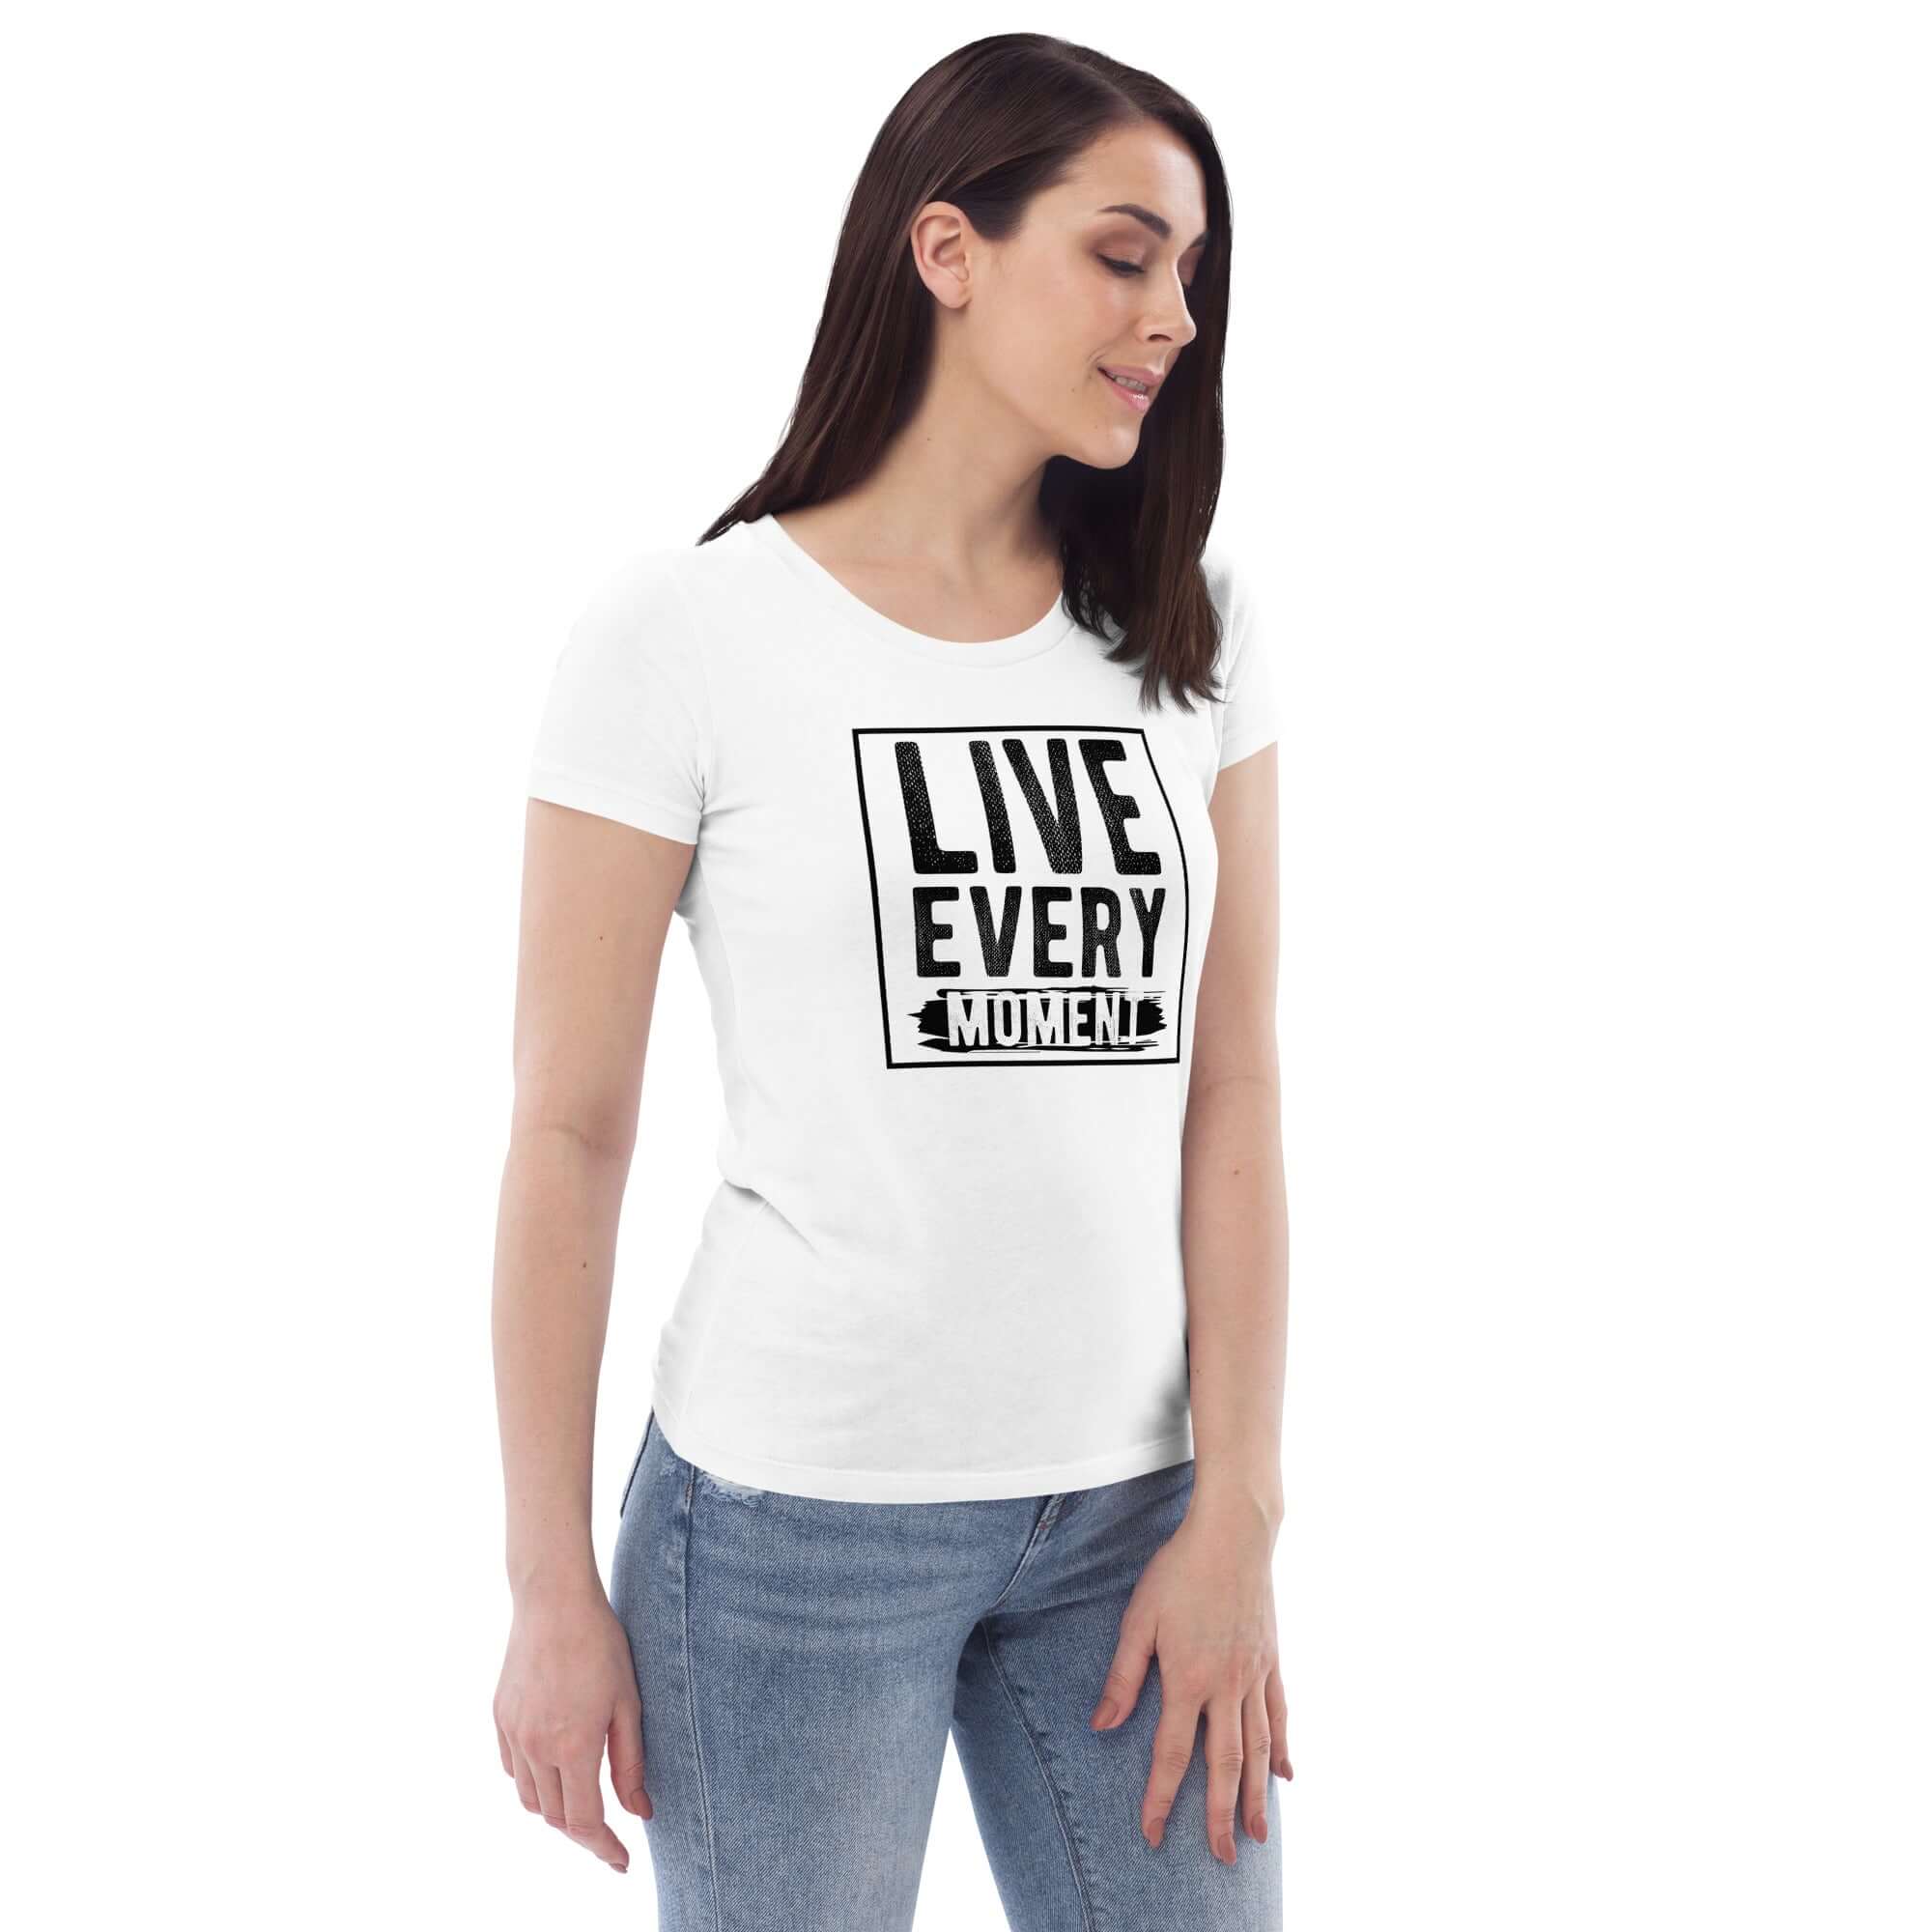 Organic Fitted Tee Live Every Moment - Revive Wear     Shop Organic Fitted Tee Live Every Moment $54.00 Browse Women's Sportswear and Activewear at Revive Wear Australia. Subscribe and receive your first 15% Discount. 